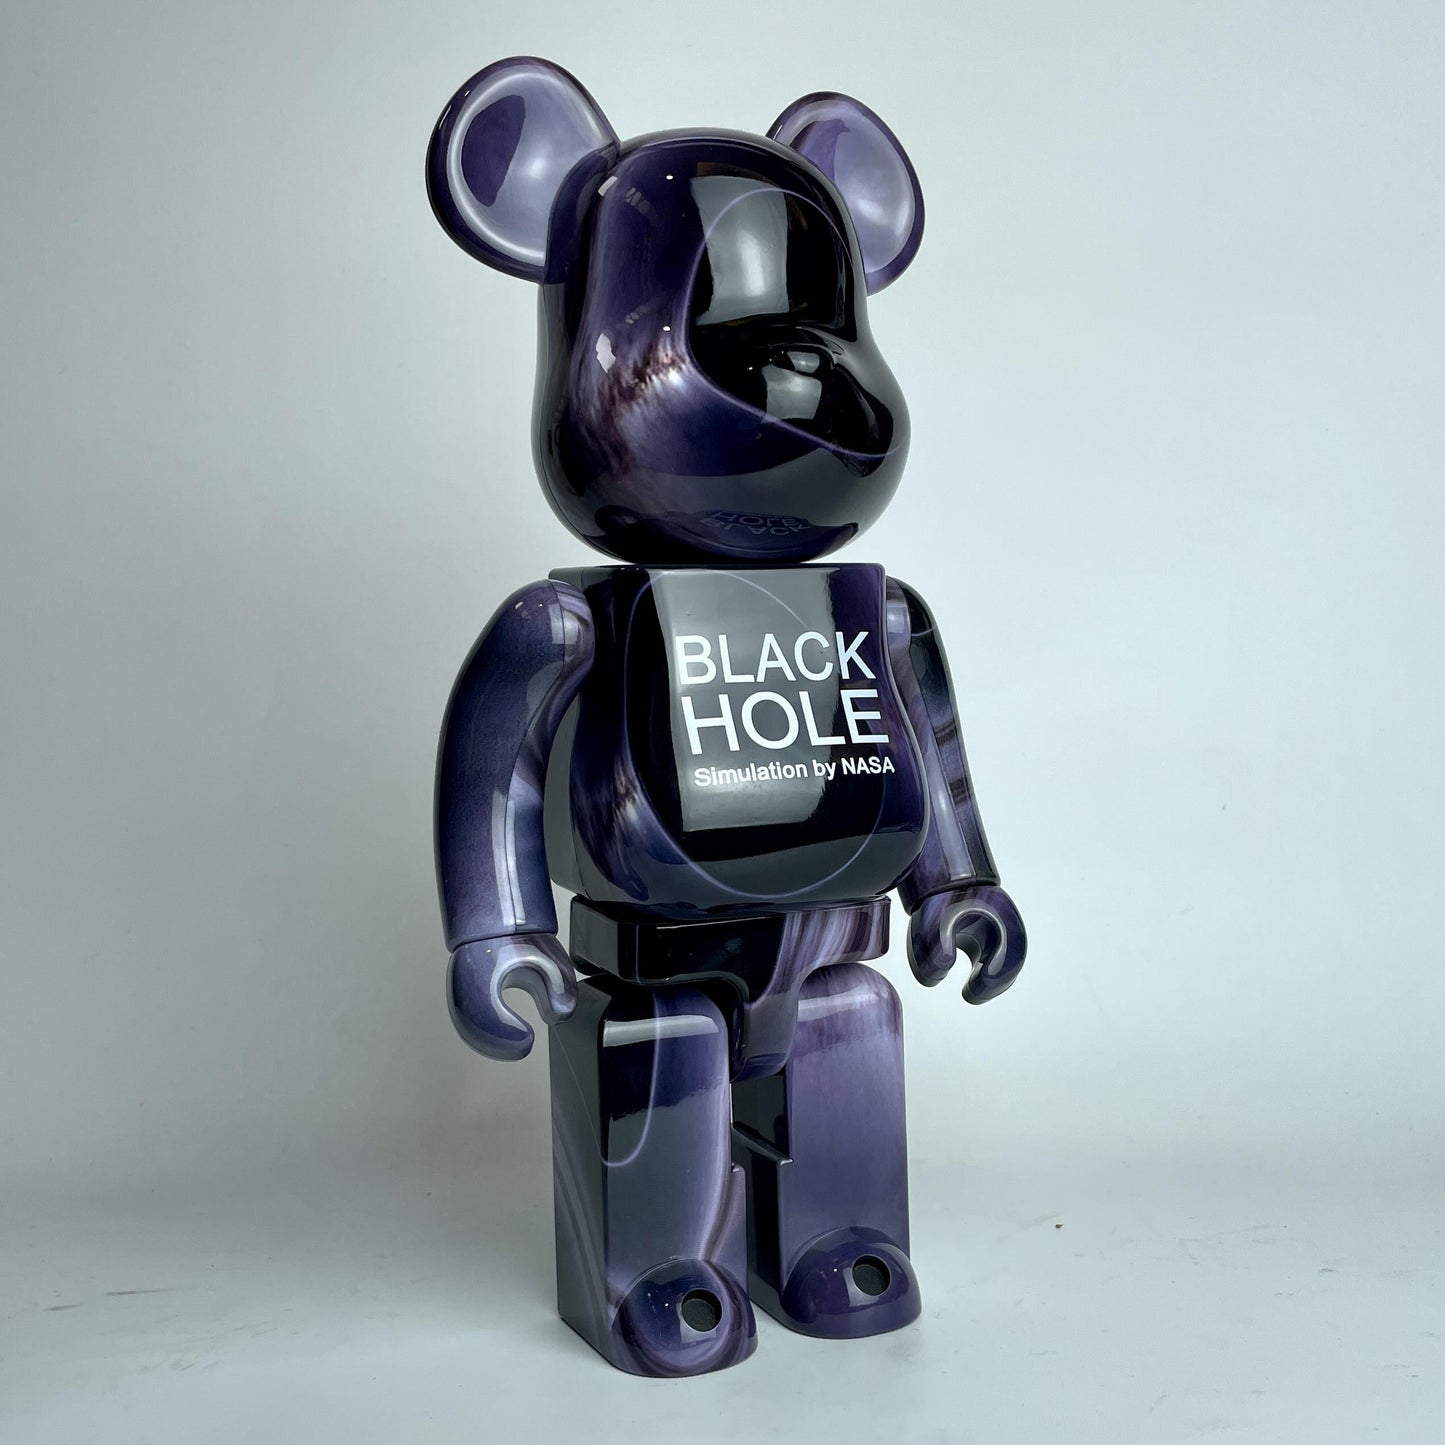 Toy - 28cm BEARBRICK 400% Black Hole ABS Action Figure Boxed